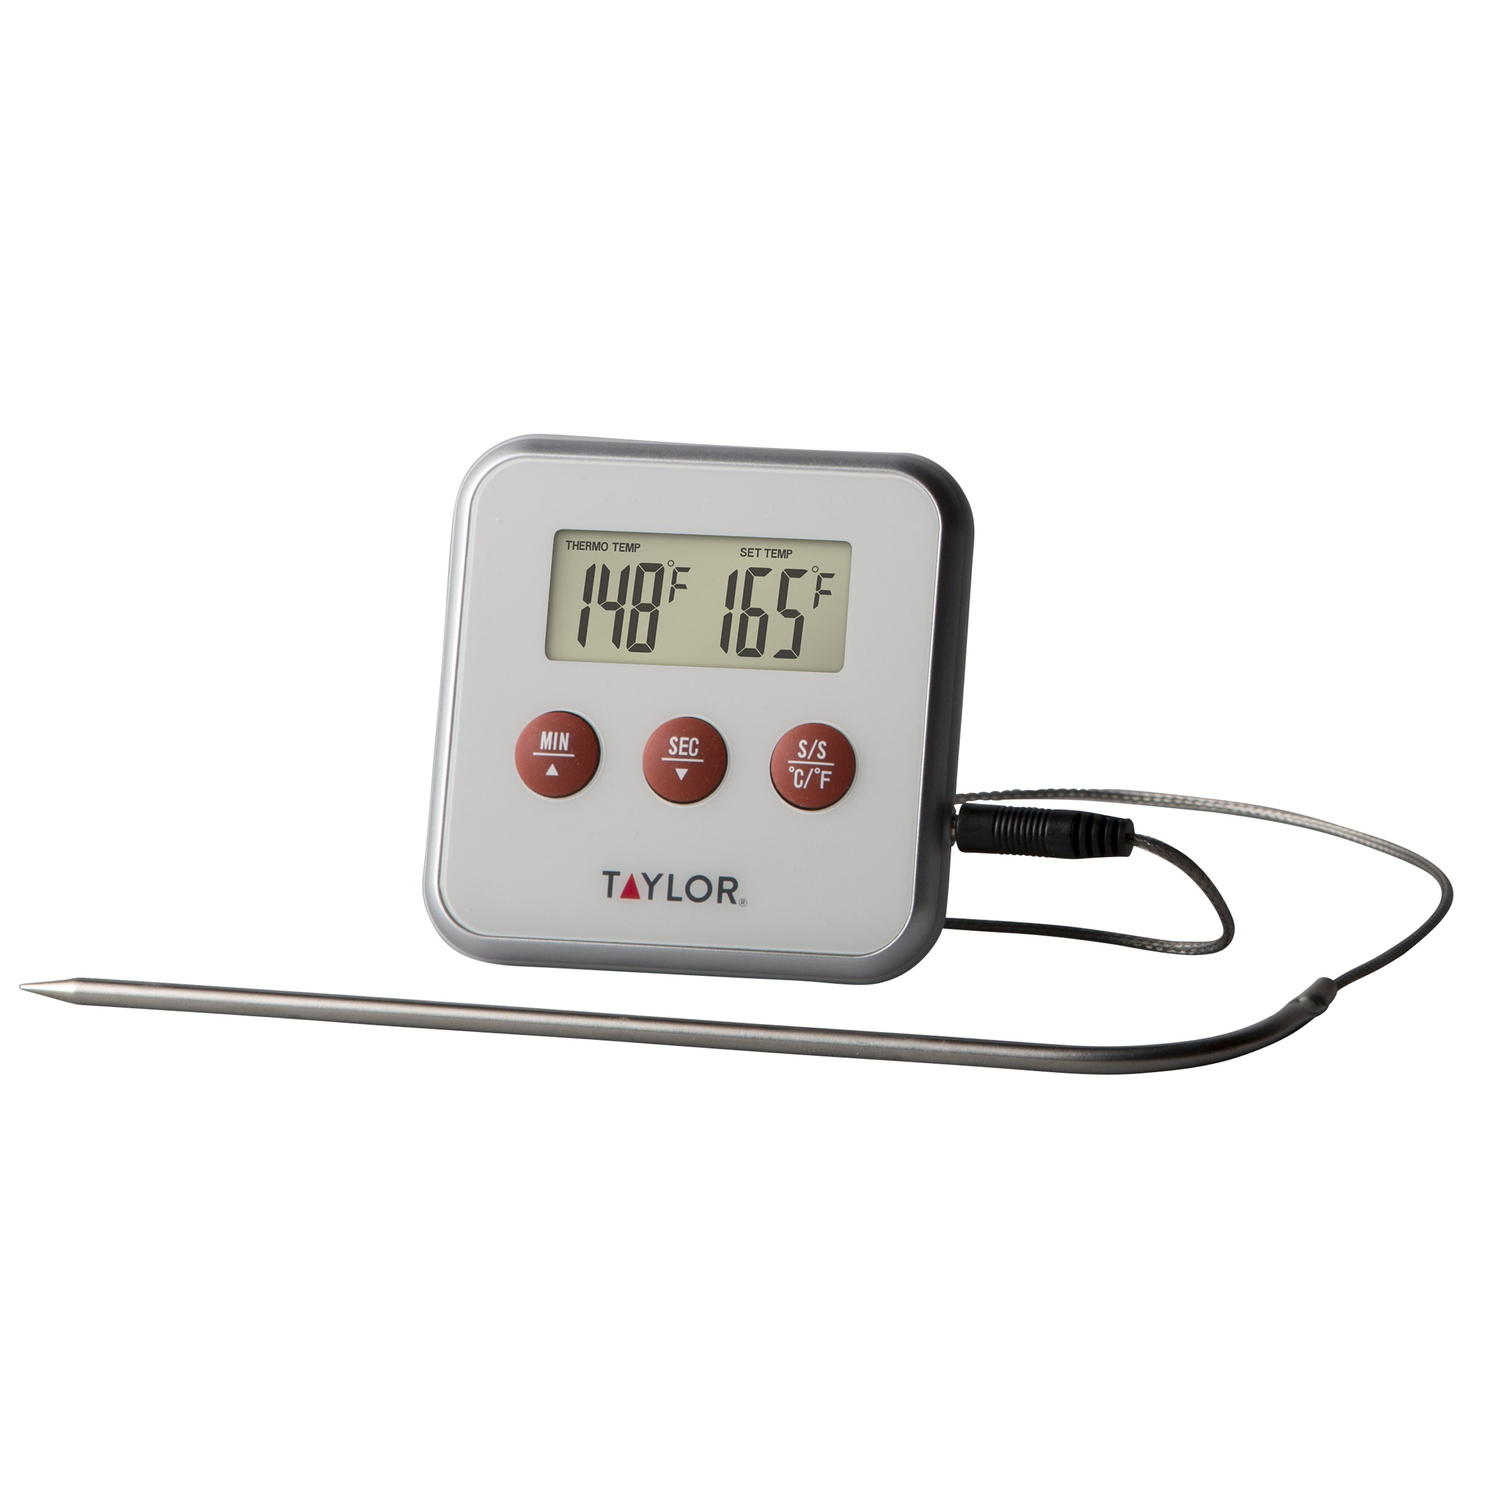 Taylor Instant Read Analog Meat Thermometer - Oven Safe Model 552